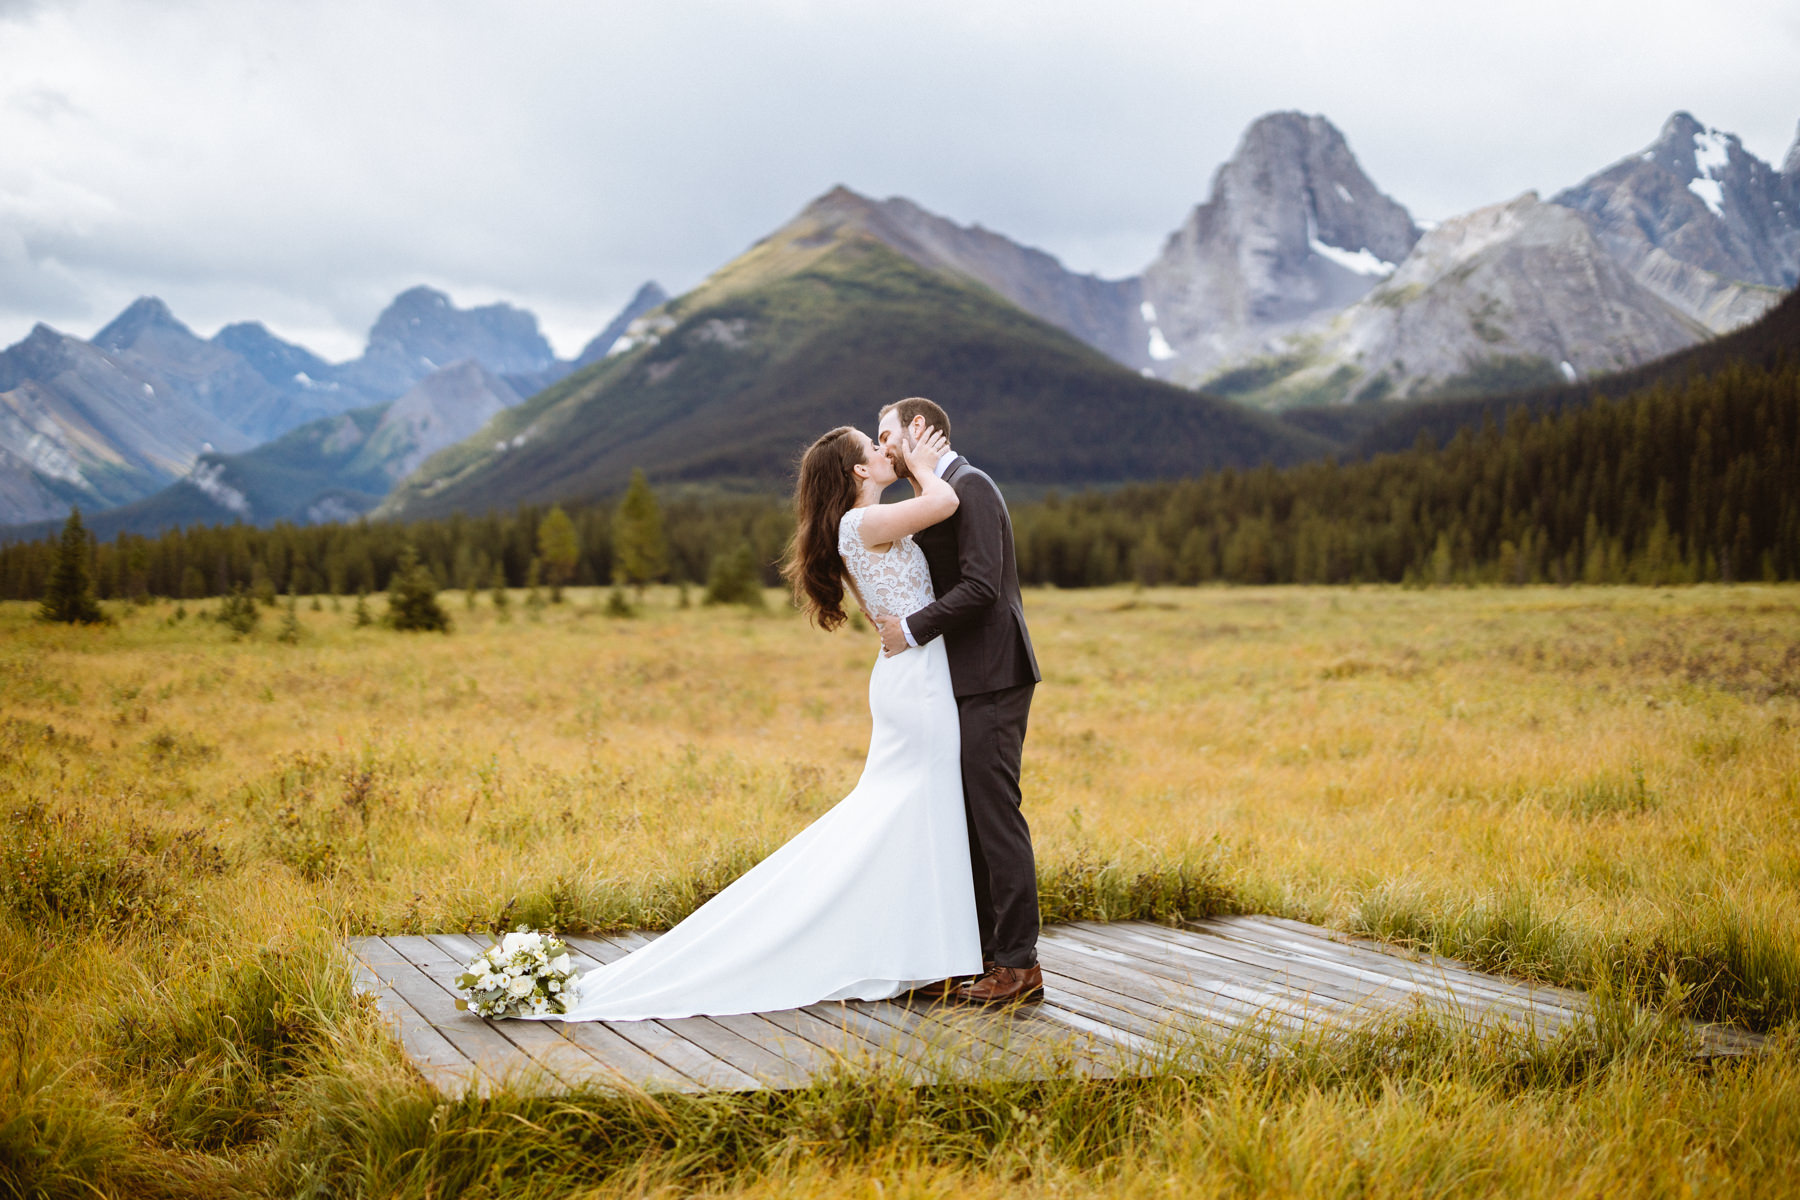 Canmore hiking elopement photographers - Image 14